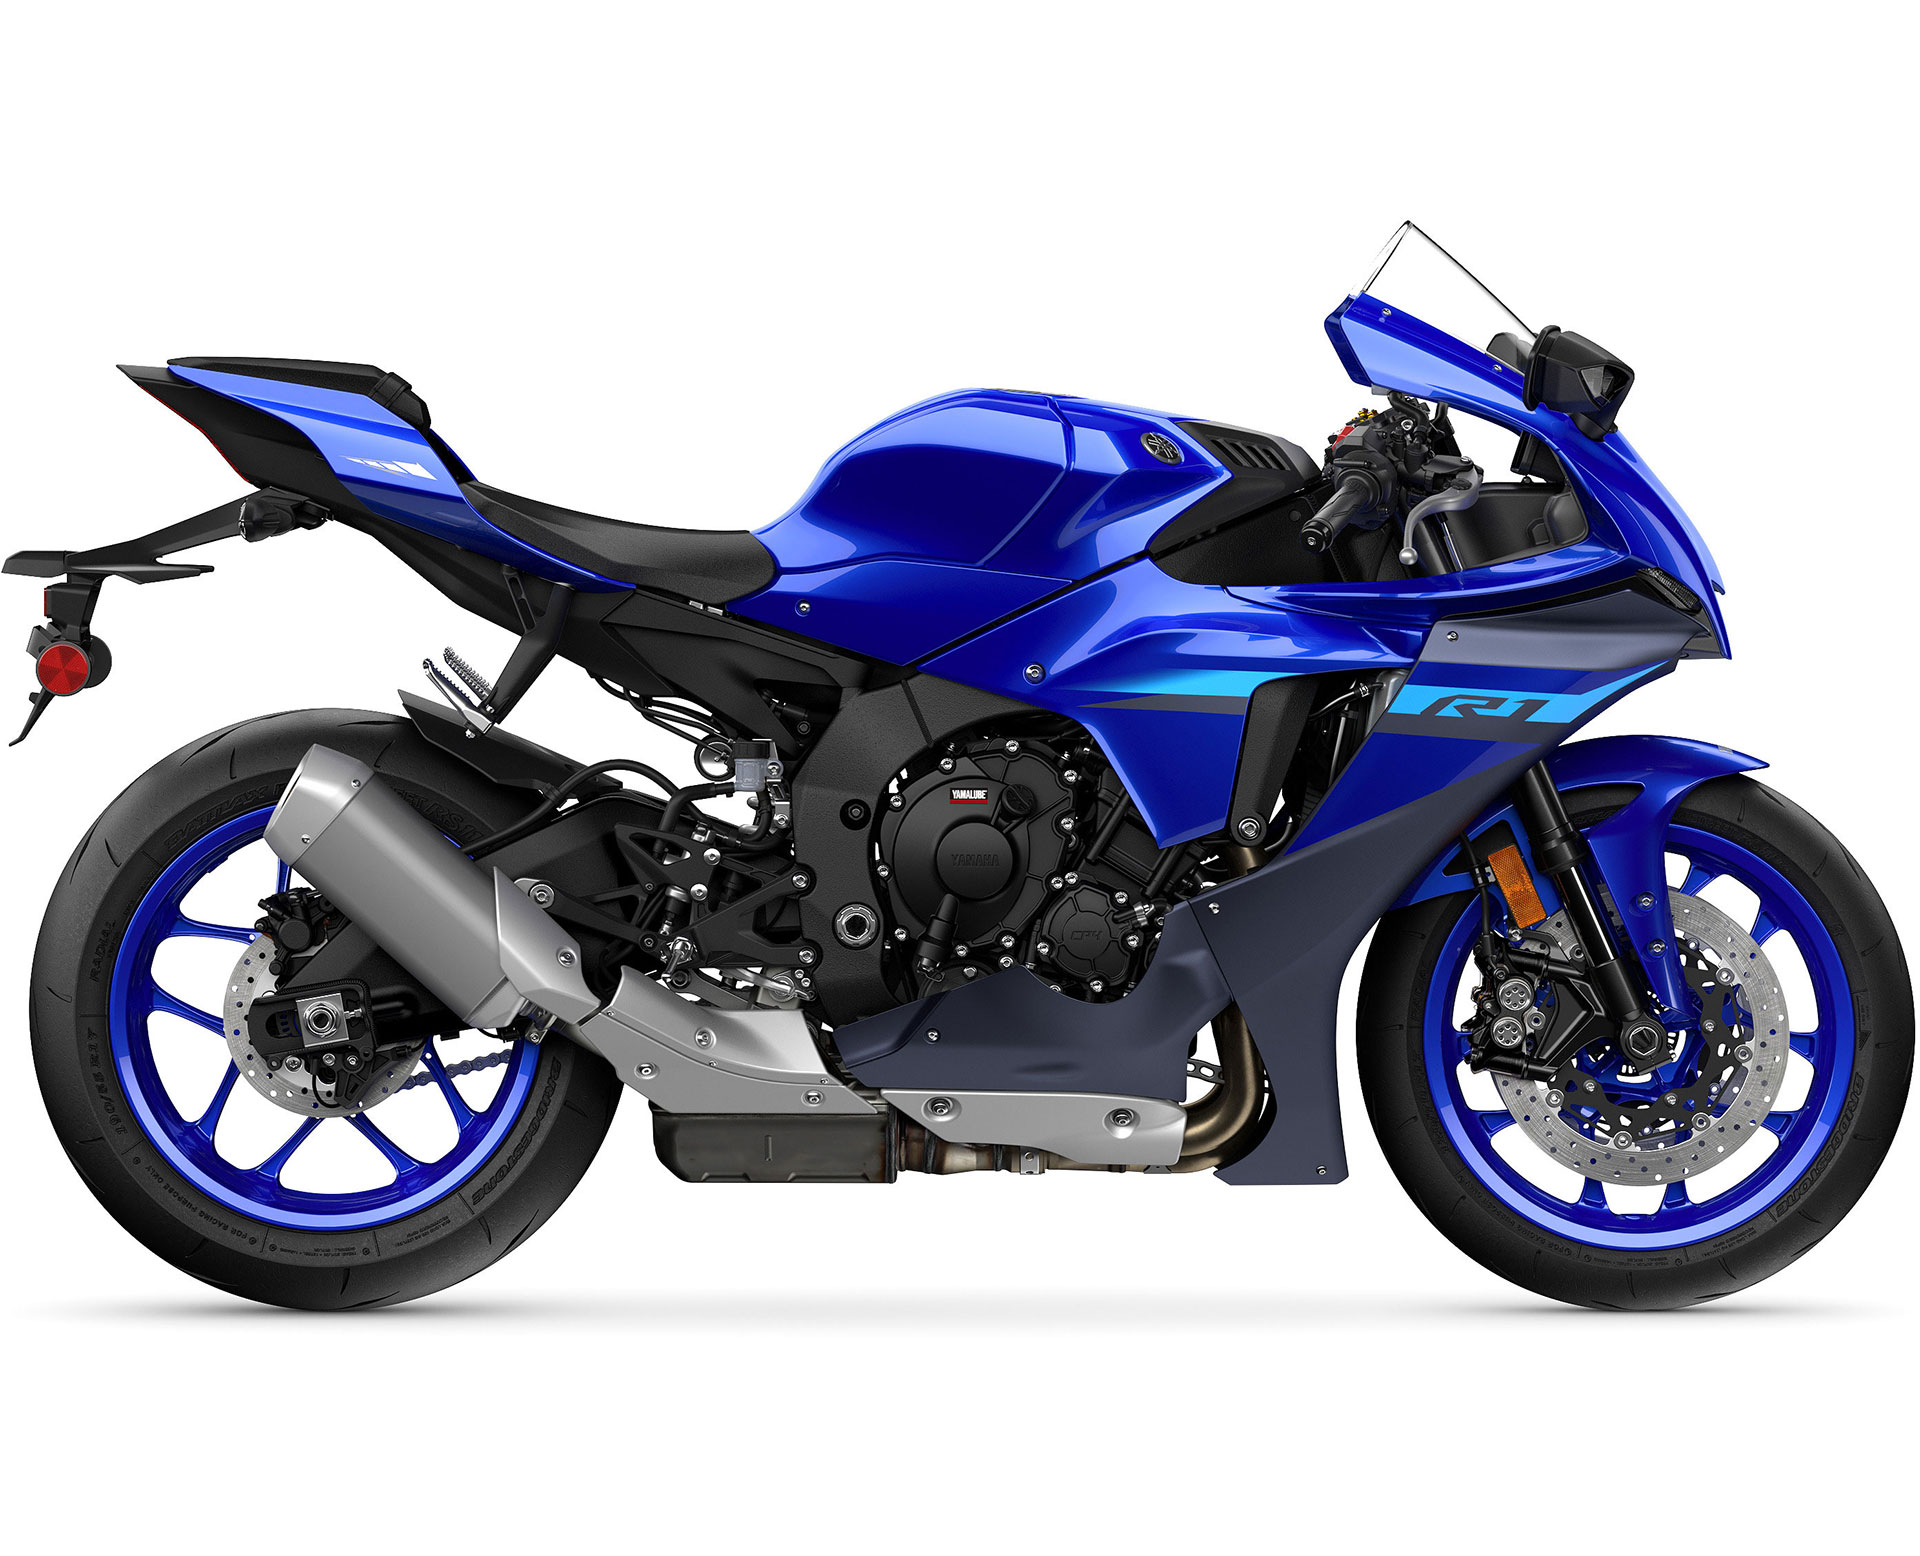 Thumbnail of your customized YZF-R1 2024